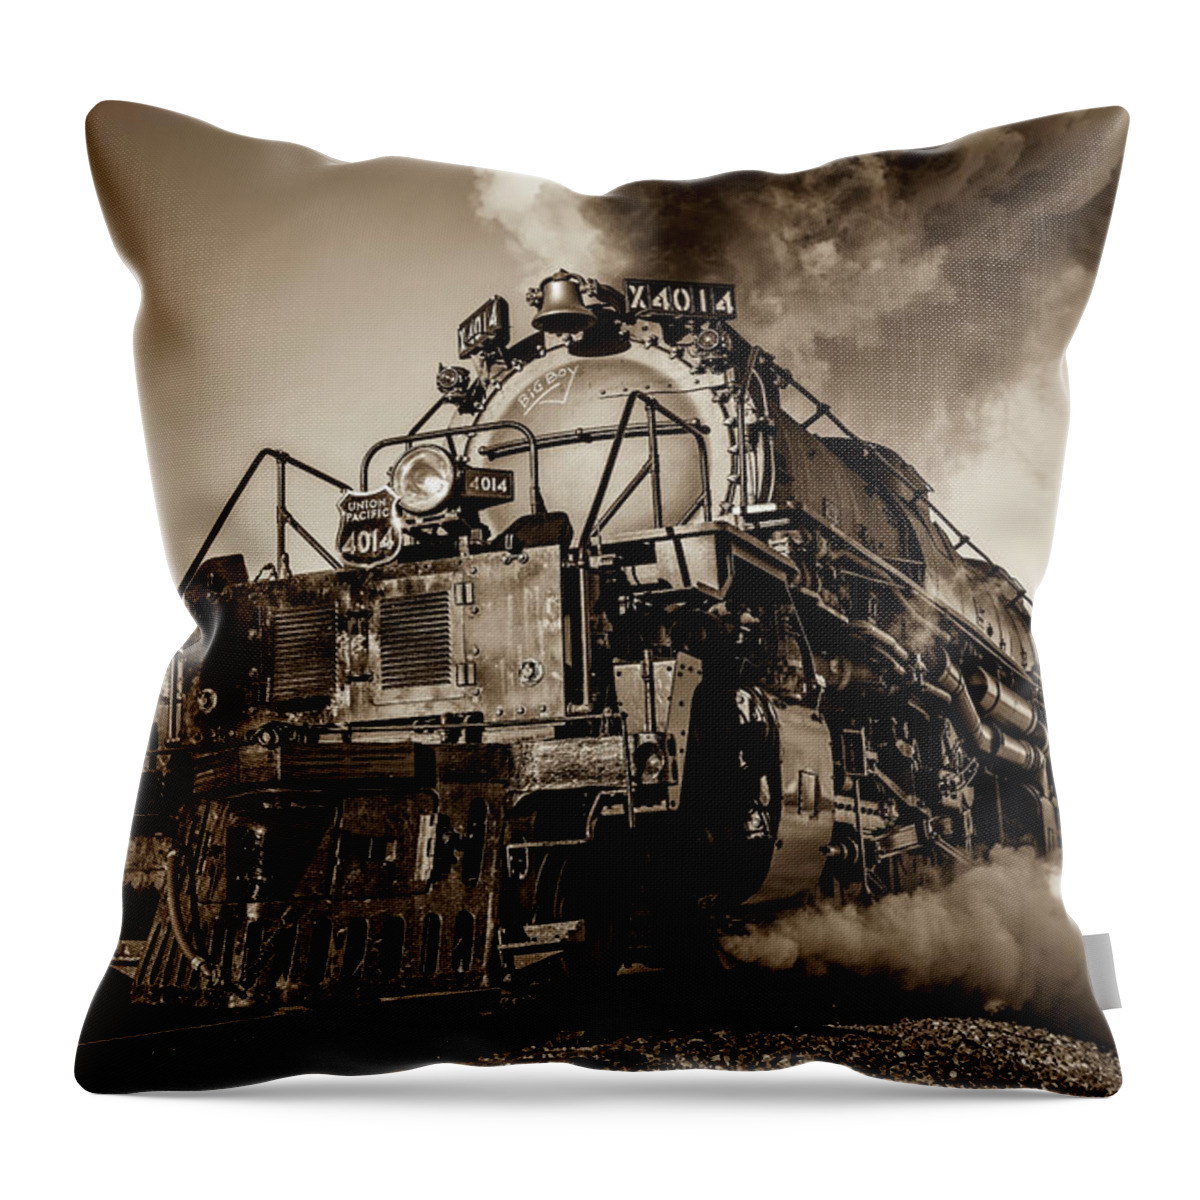 Train Throw Pillow featuring the photograph Union Pacific 4014 Big Boy by David Morefield